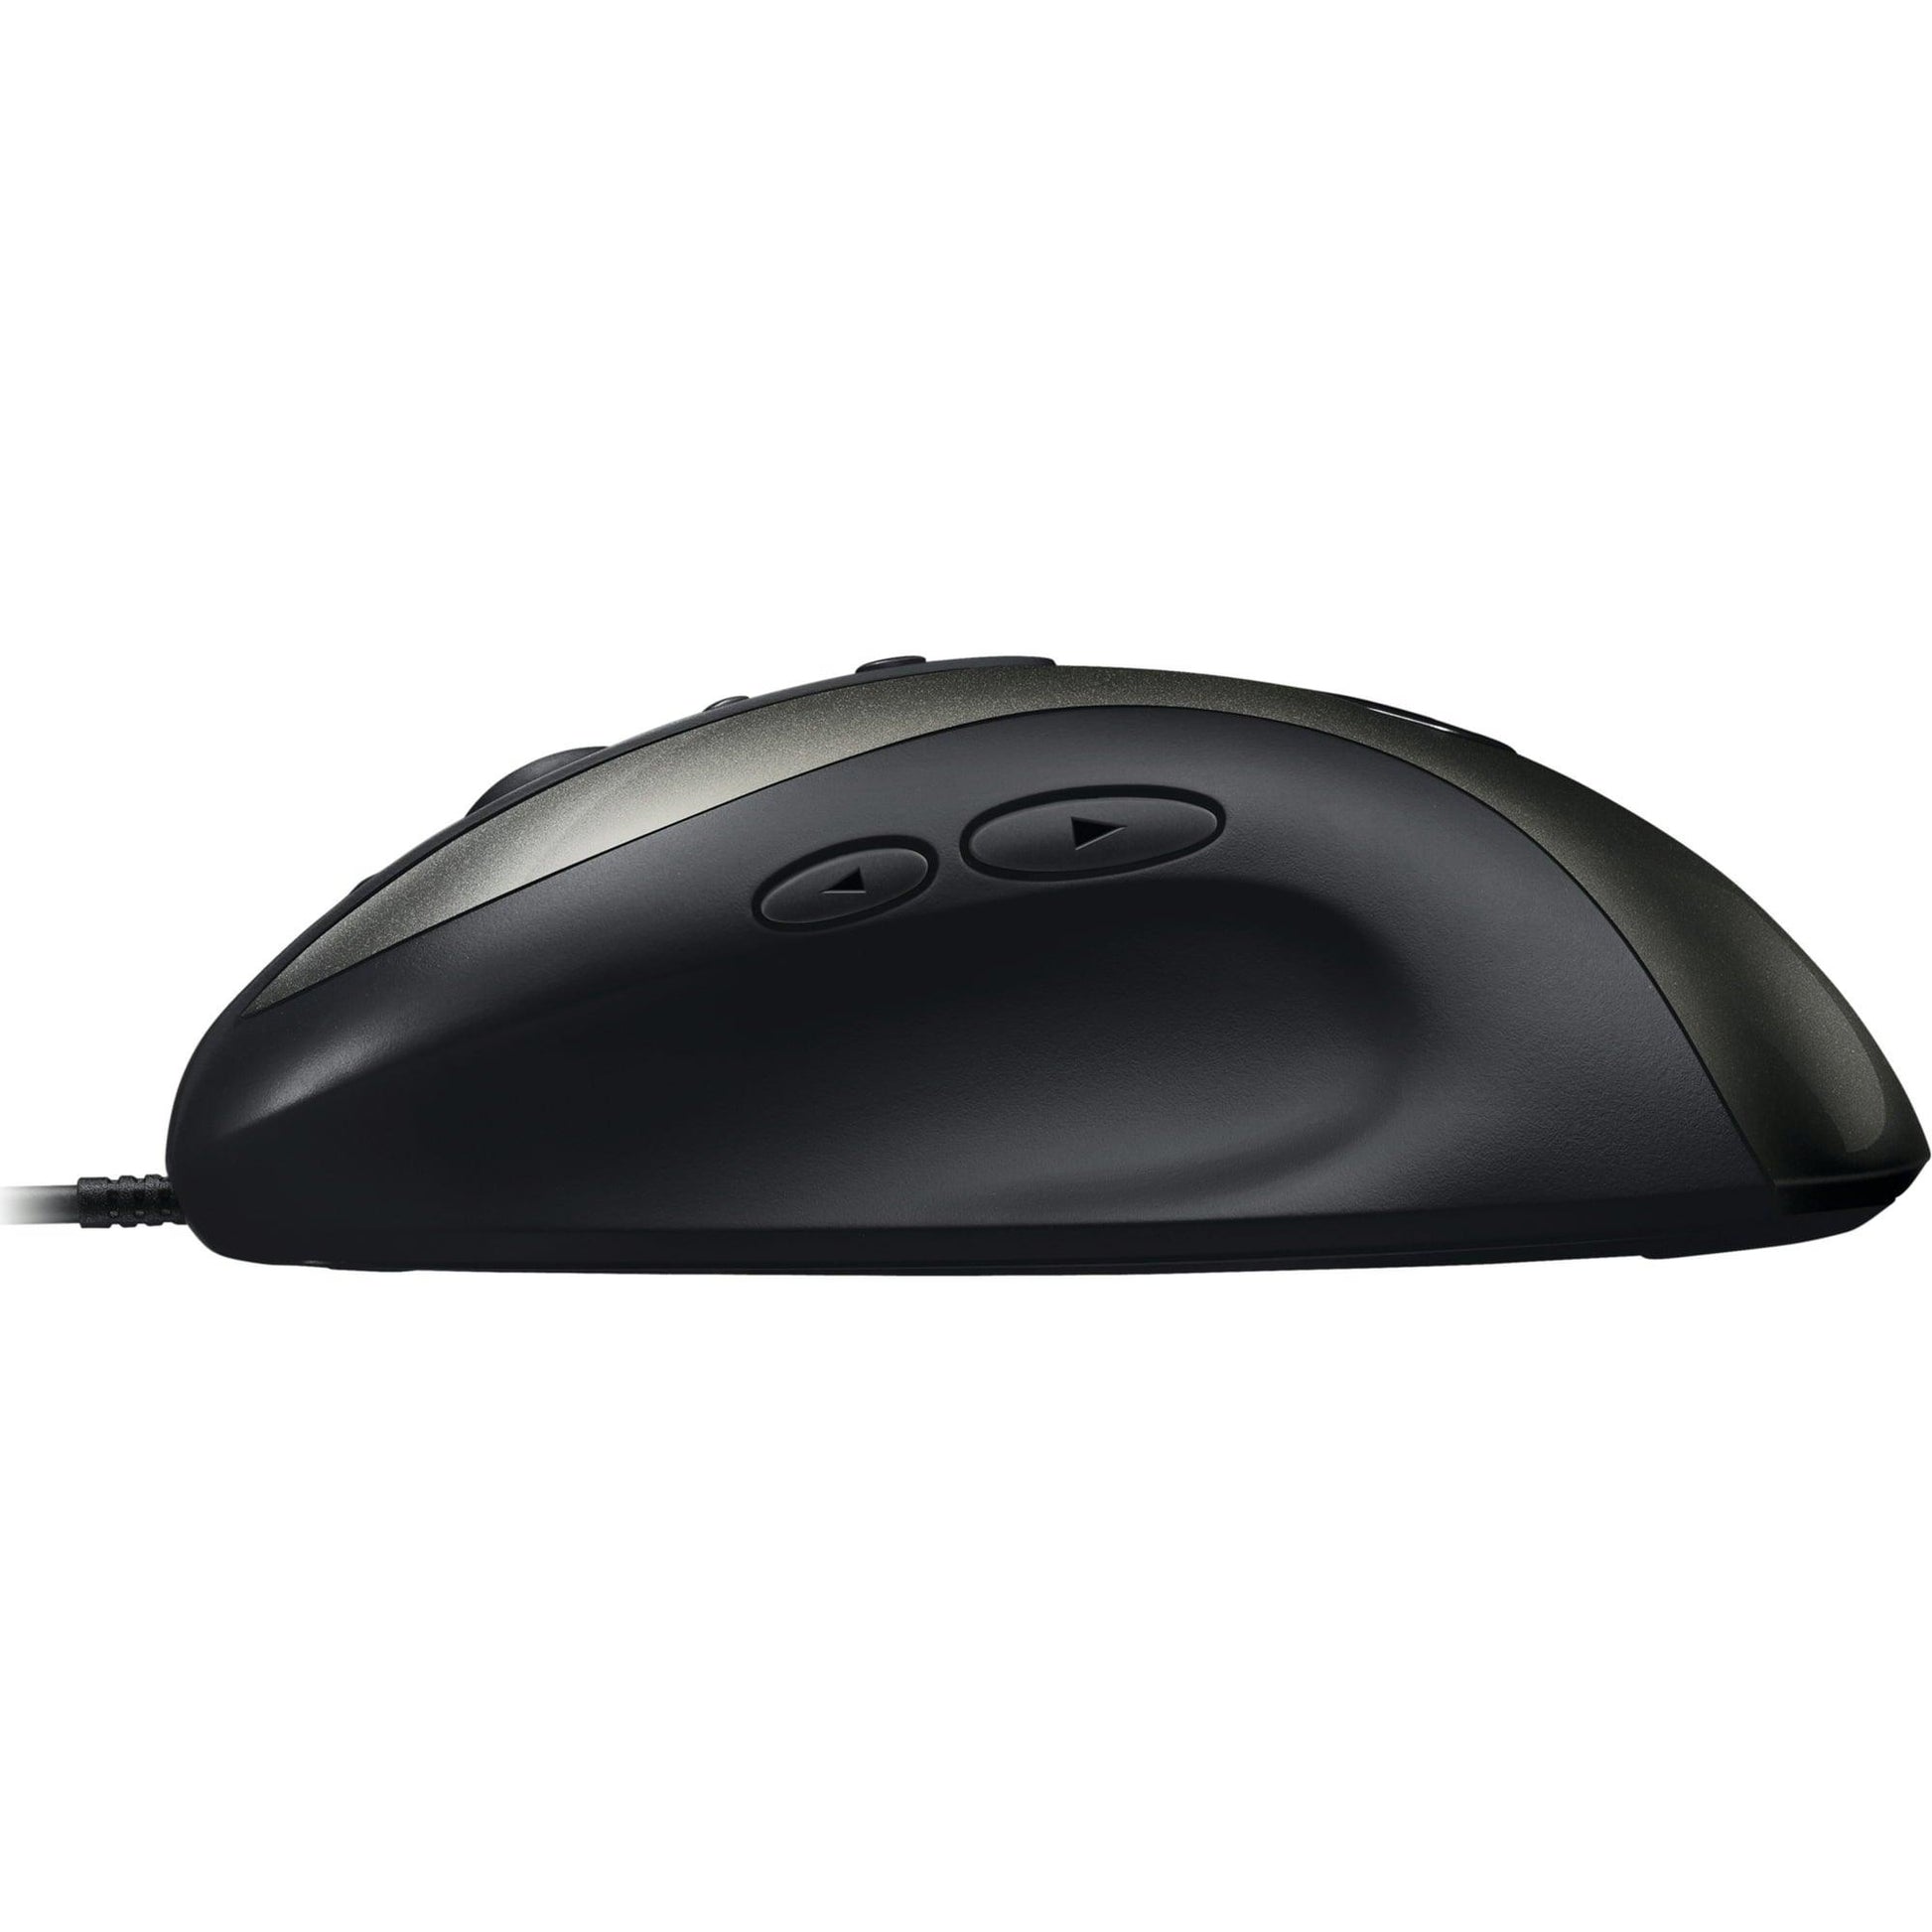 Logitech G MX518 Gaming Mouse - Logitech G MX518 Gaming Mouse - undefined Ennap.com